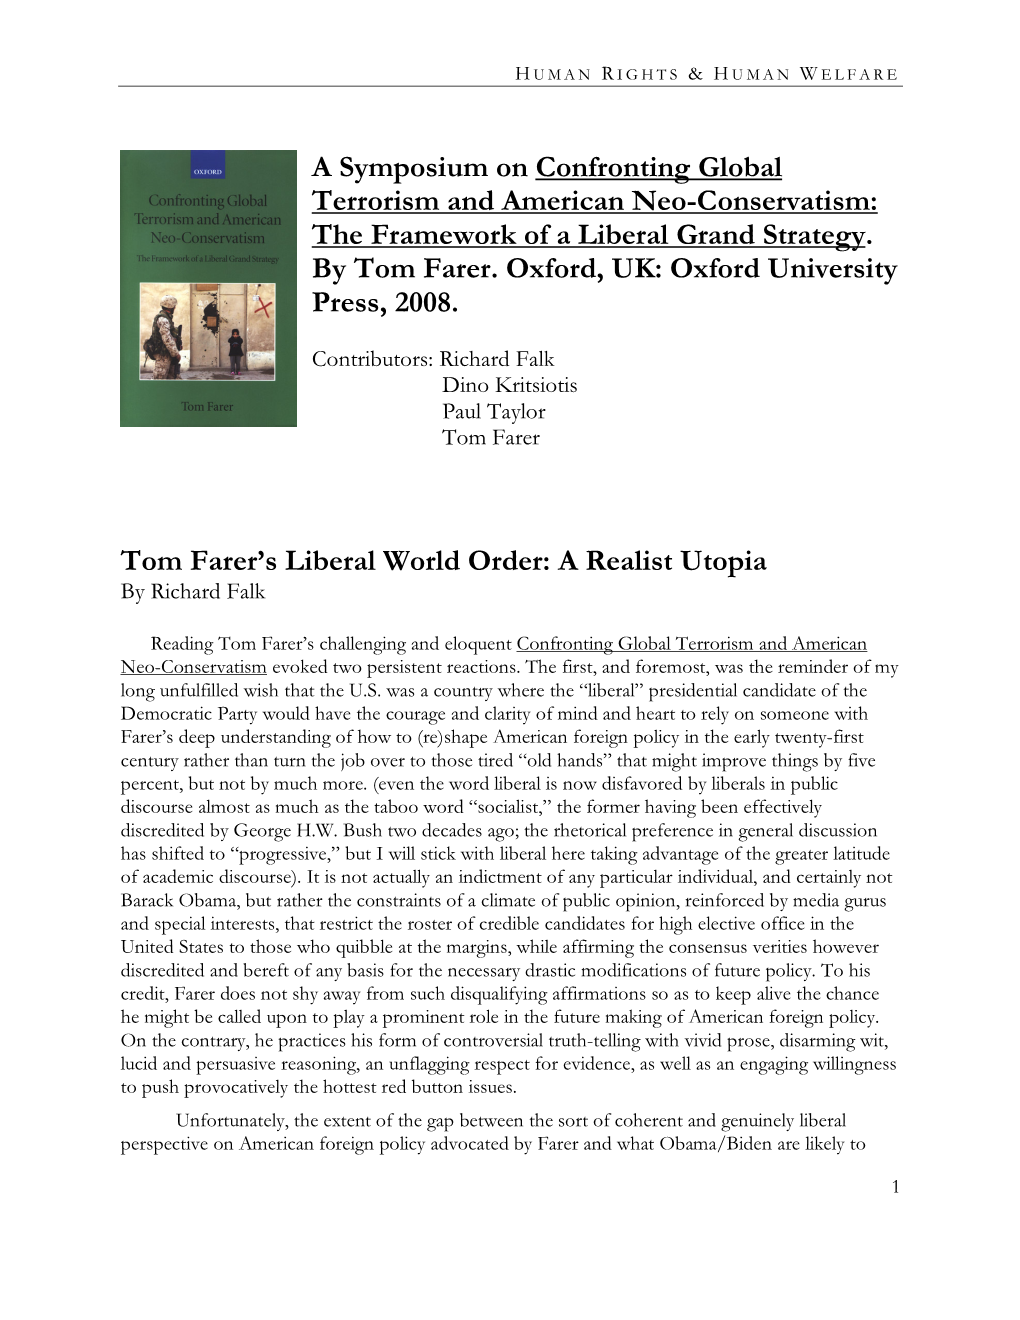 A Symposium on Confronting Global Terrorism and American Neo-Conservatism: the Framework of a Liberal Grand Strategy. by Tom